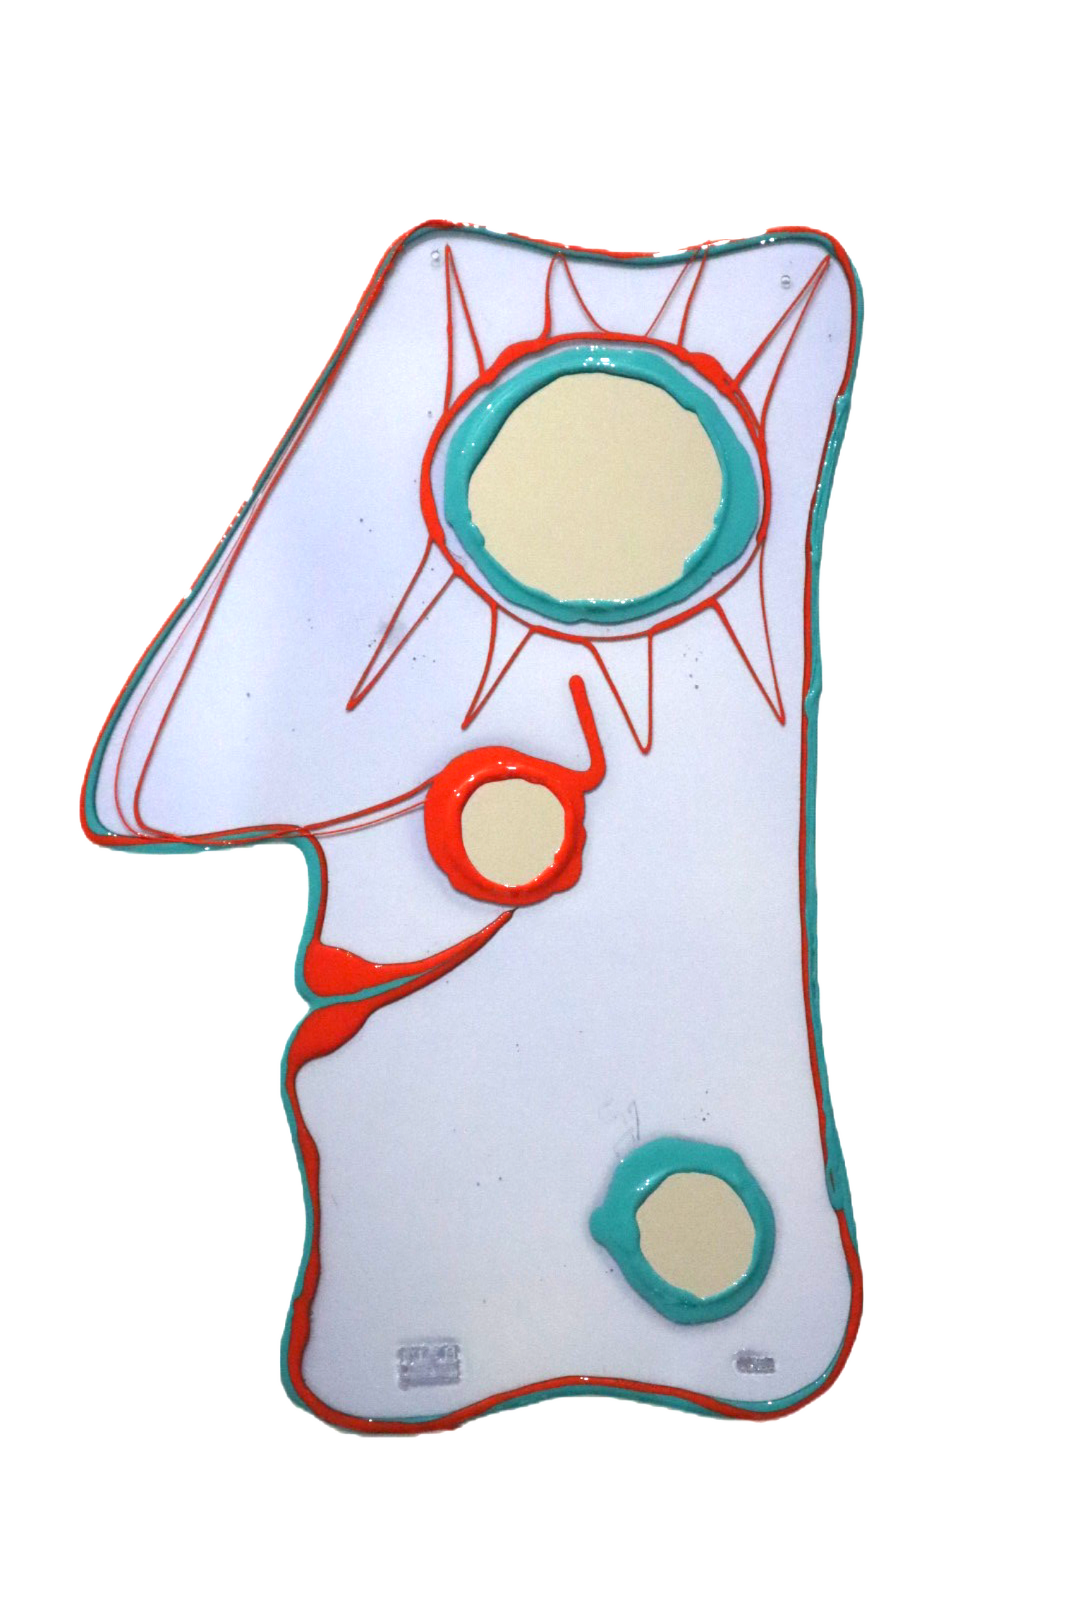 Look at Me Mirror Small by Fish Design by Gaetano Pesce